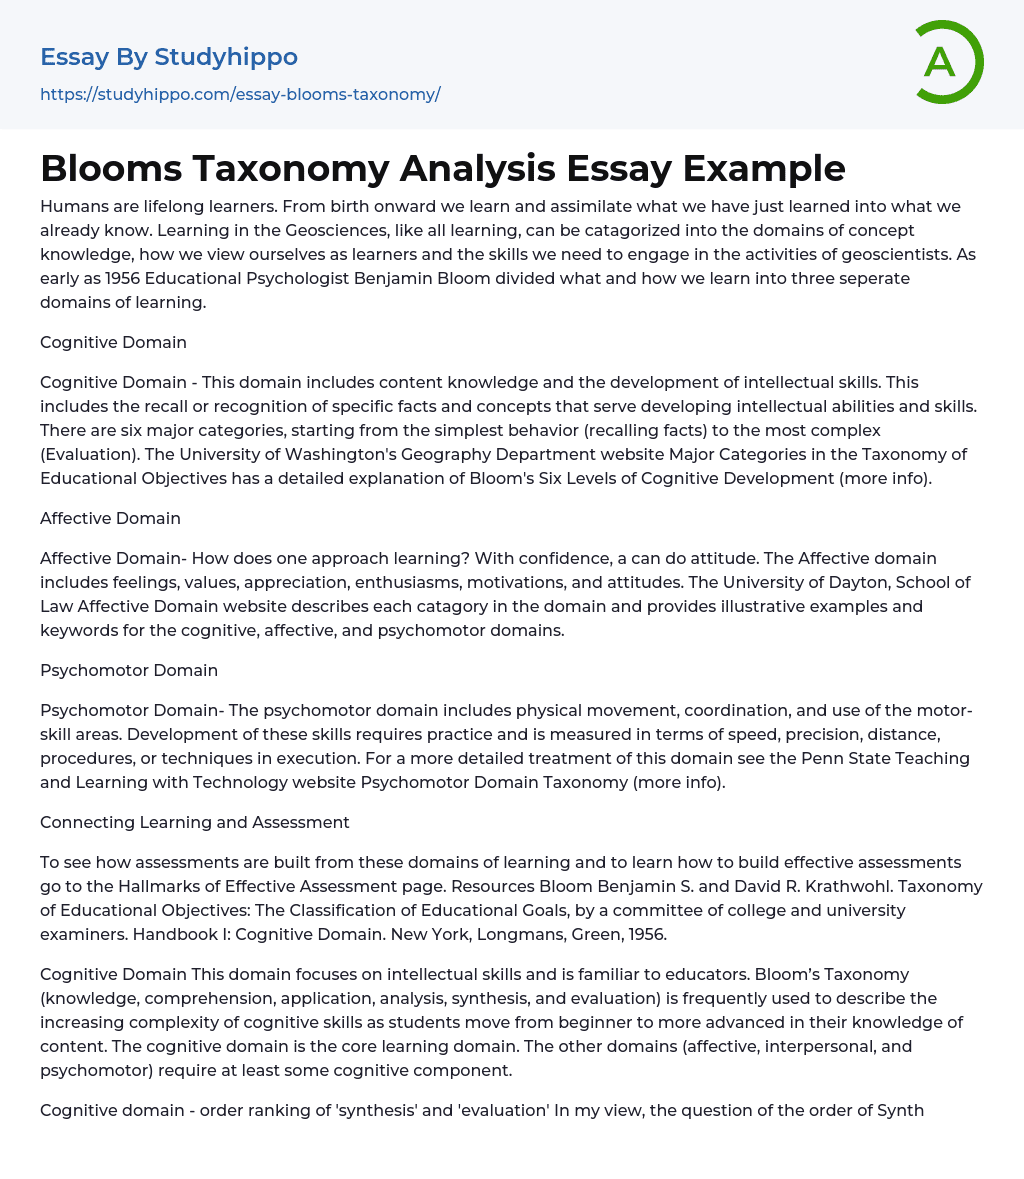 Blooms Taxonomy Analysis Essay Example